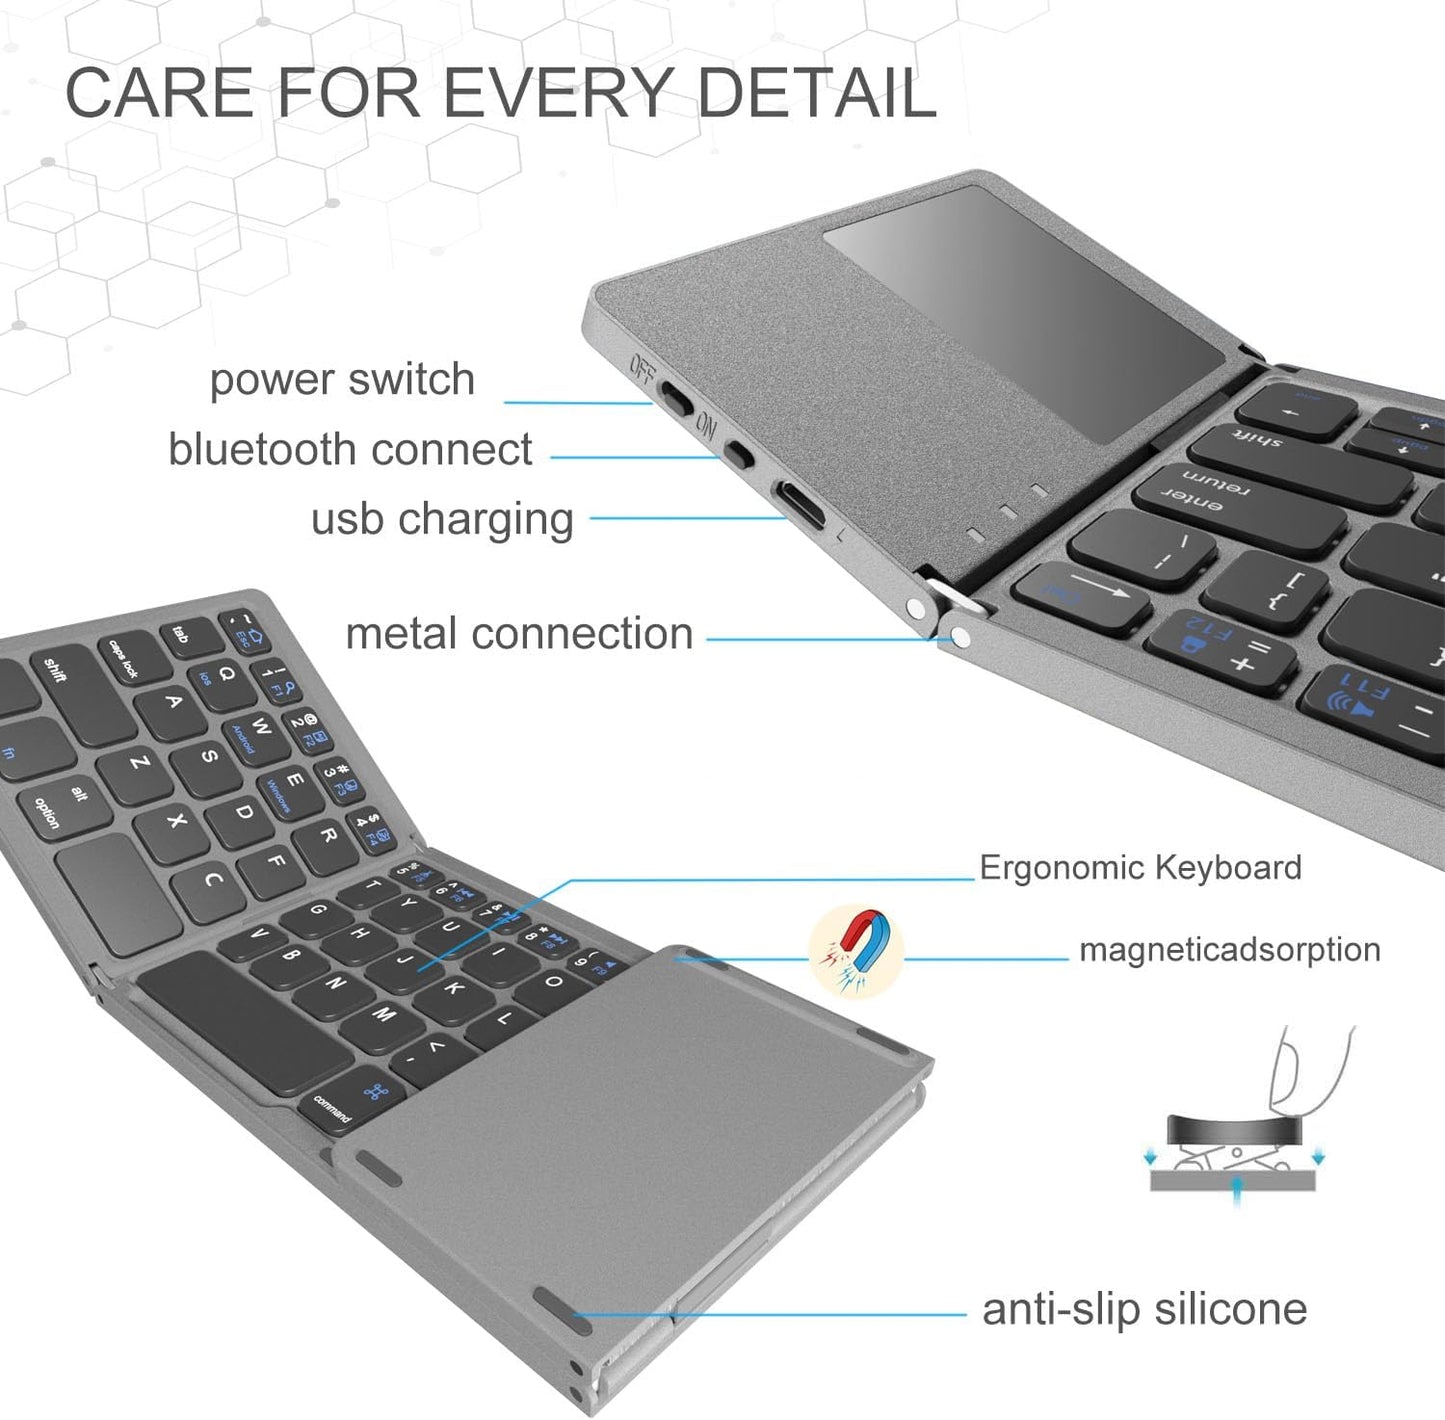 POPULAR Gimibox Foldable Bluetooth Keyboard, Pocket Size Portable Mini BT Wireless Keyboard with Touchpad for Android, Windows, PC, Tablet, with Rechargeable Li-ion Battery-Dark Gray